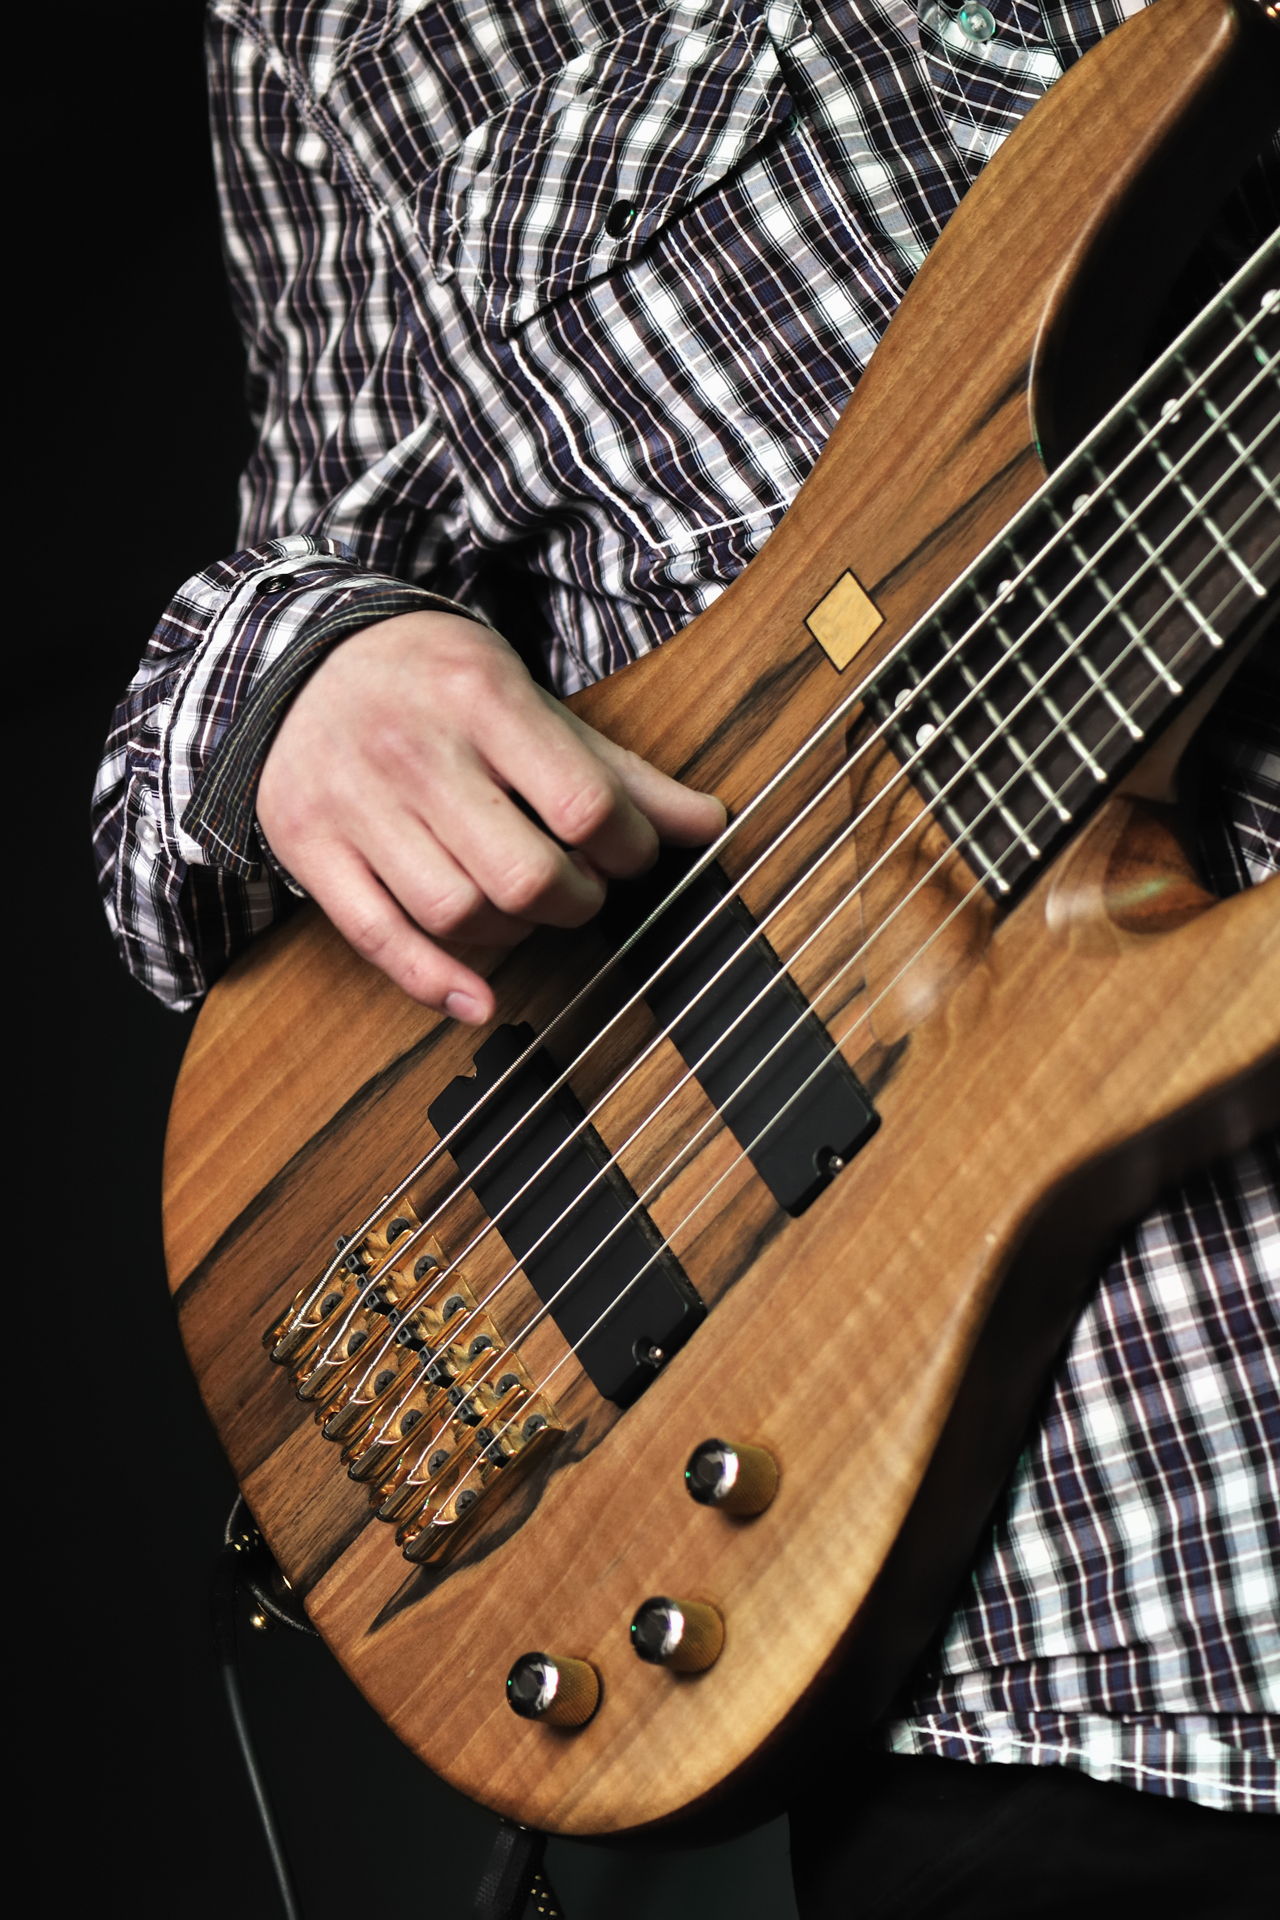 Bass Chords : Bass Guitar Chords for Android - APK Download / What are